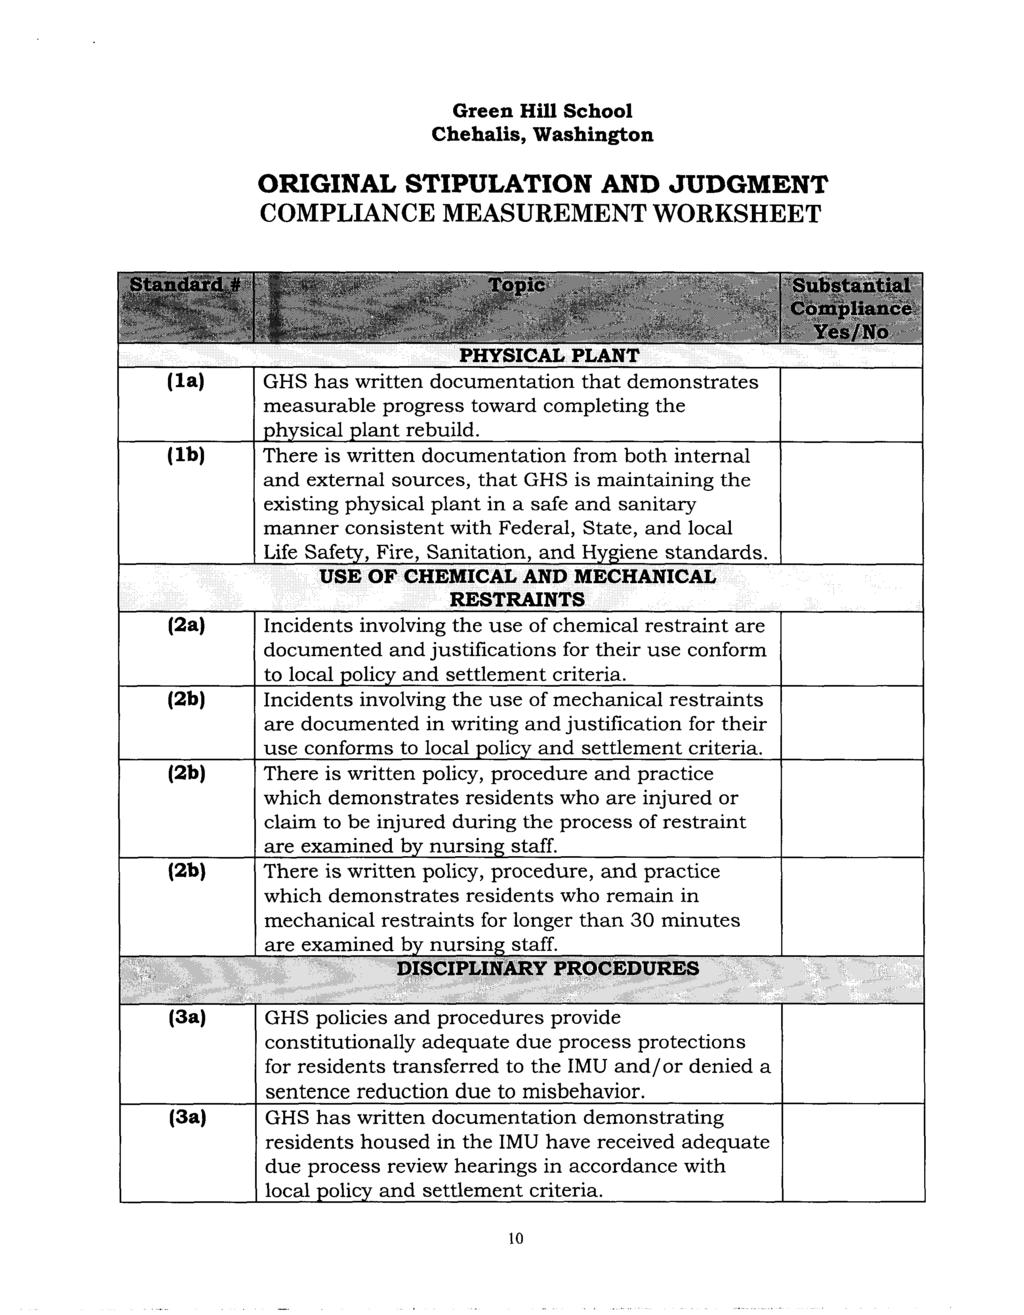 Green Hill School Chehalis, Washington ORIGINAL STIPULATION AND JUDGMENT COMPLIANCE MEASUREMENT WORKSHEET Standard # Topic Substantial Compliance Yes/No PHYSICAL PLANT (la) GHS has written